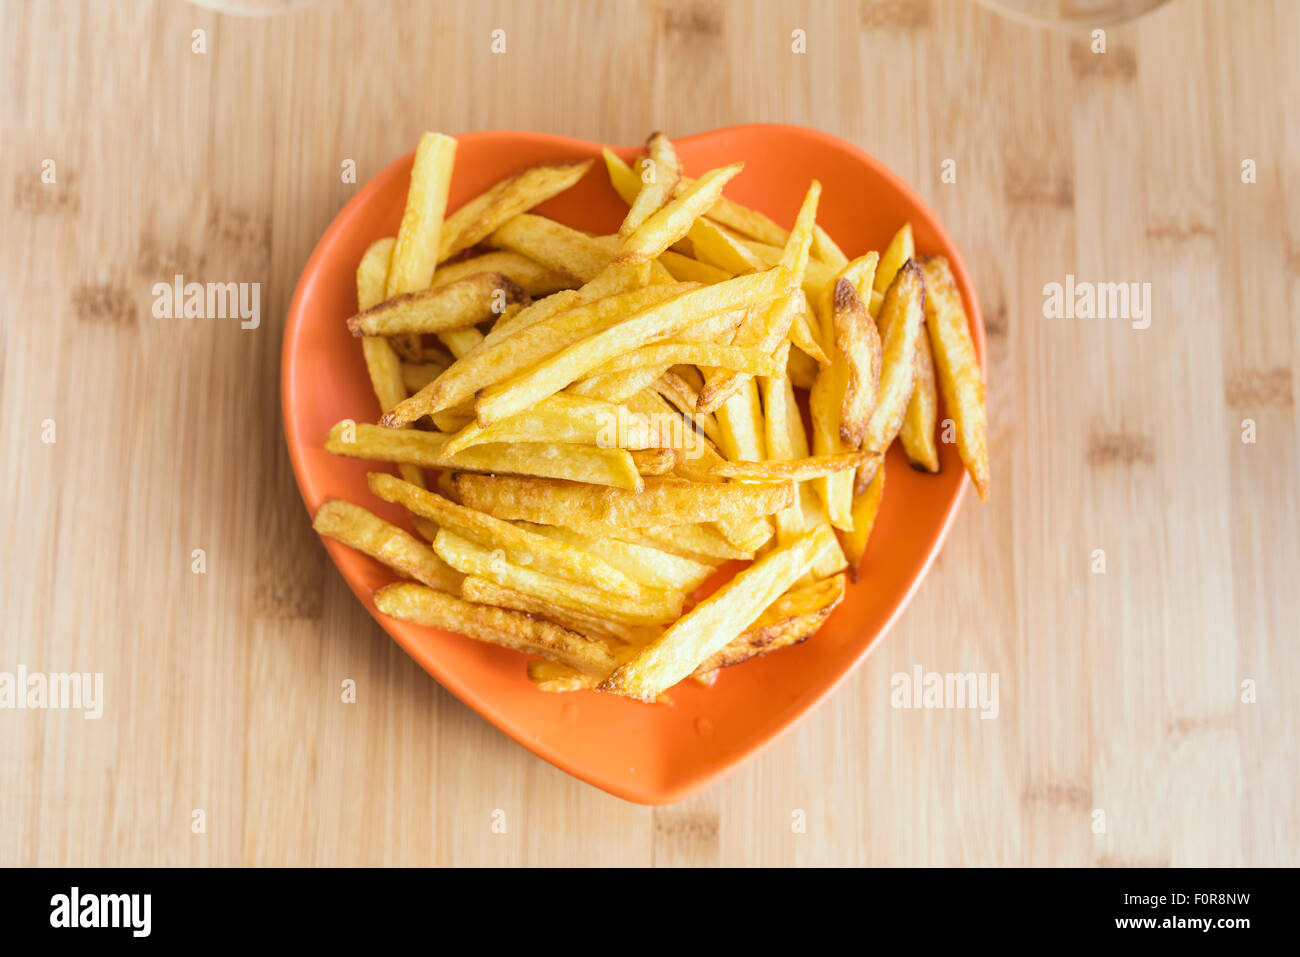 Fried French Potatoes on wooden background Stock Photo